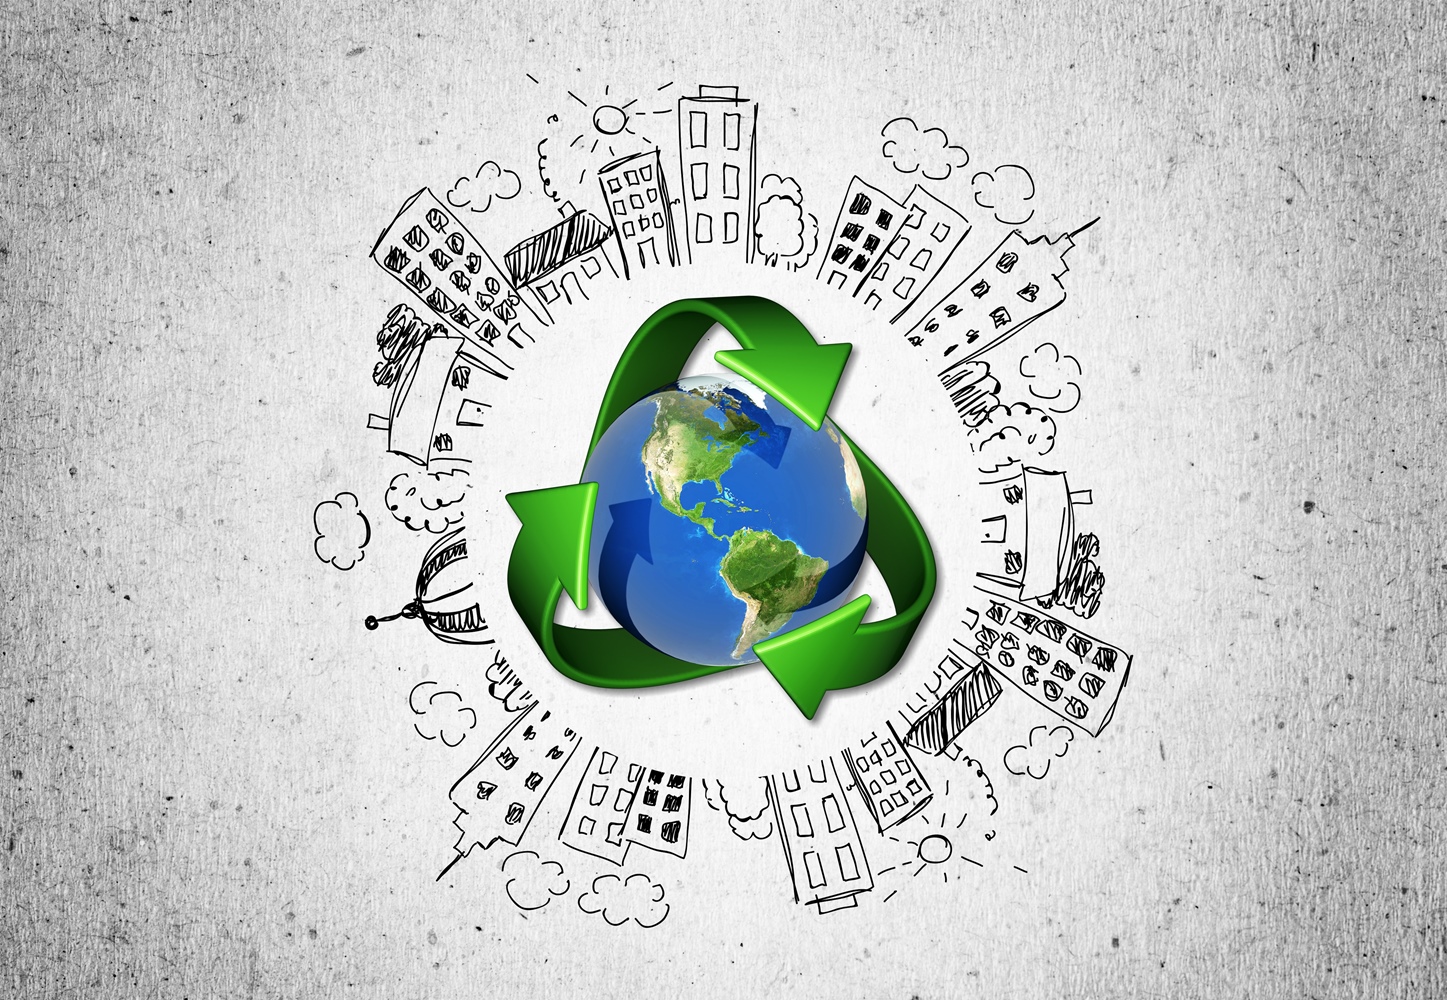 The Recycling Industry is Fast Becoming a Billion Dollar Industry